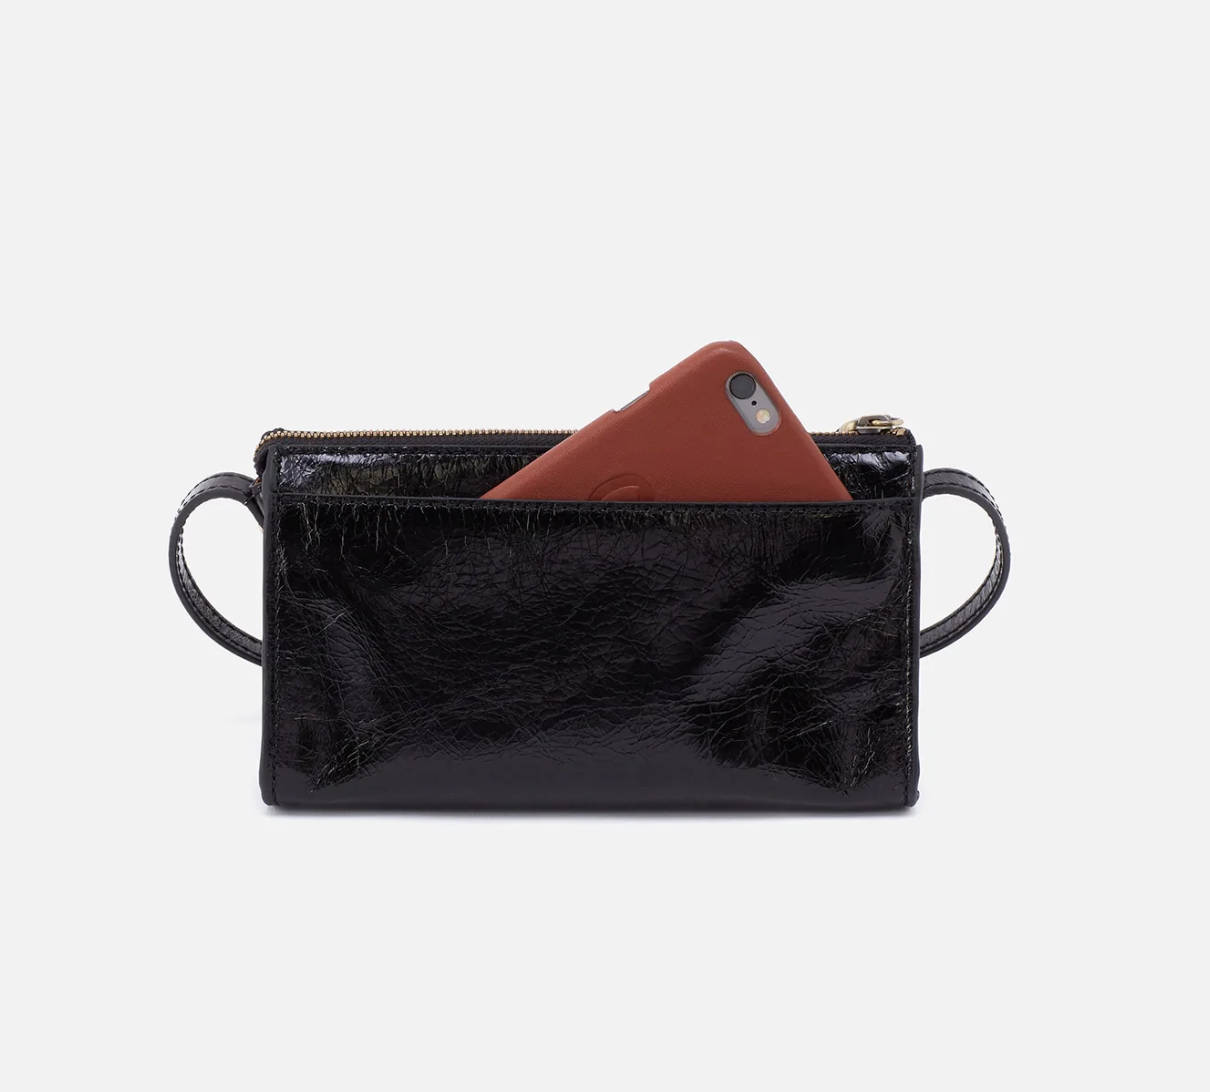 The Jewel in black by HOBO is a small crossbody designed to hold the essentials. It has a compact size with enough space for your phone, keys and cards. Check it out at the Painted Cottage in Edgewater, MD